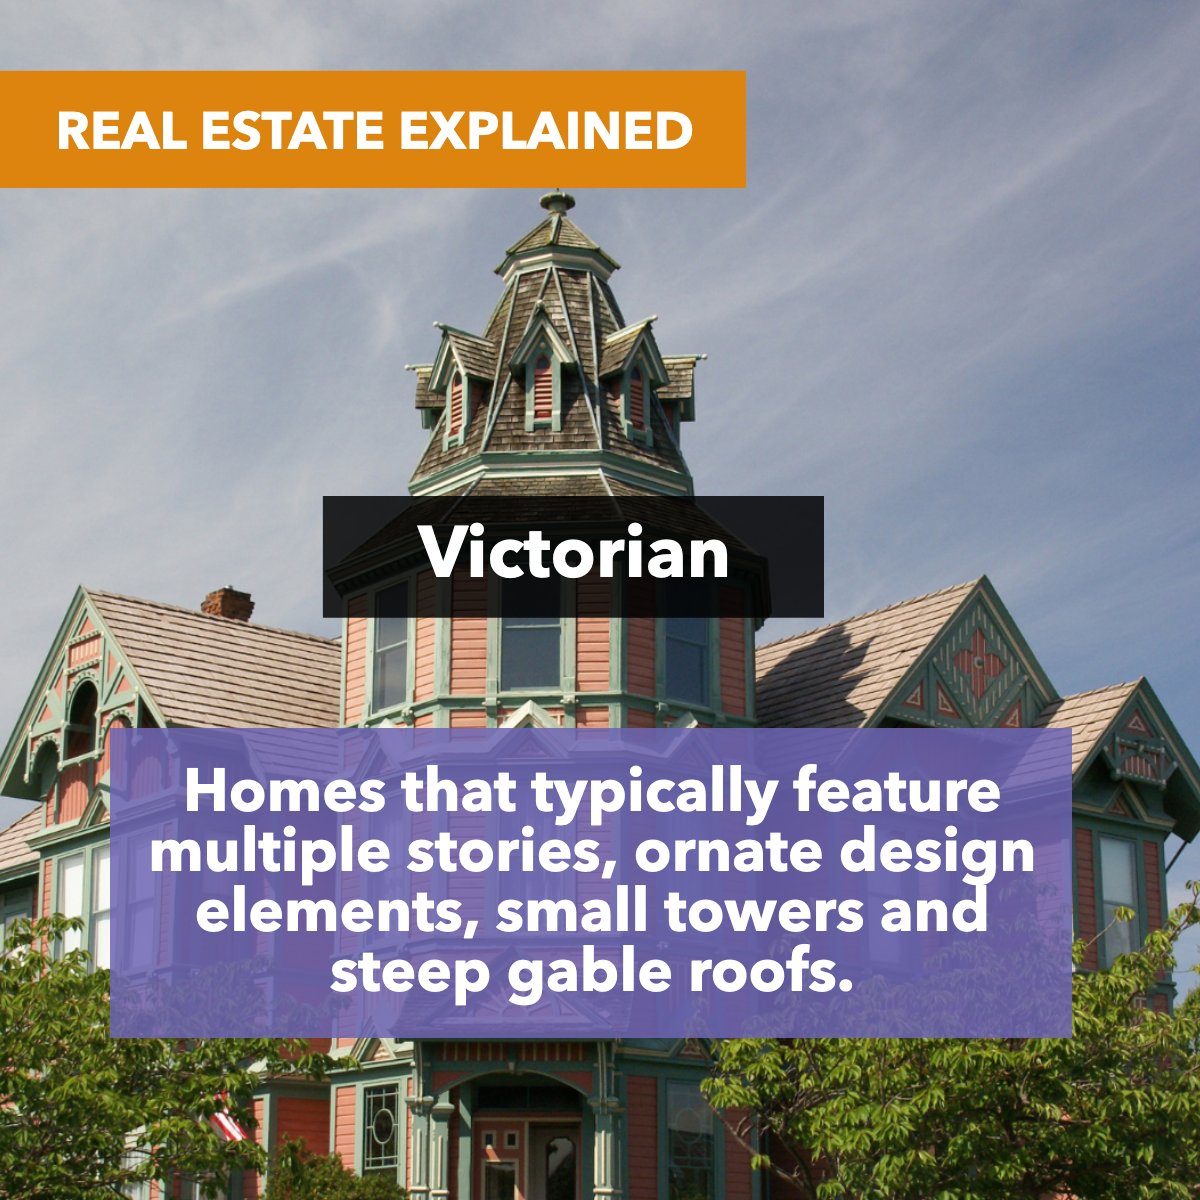 Did you know what a Victorian House is? 🤔 Is this the type of house that you like? #victorianhouse #realestate #facts #realfacts #RacingRealEstateAgent #BarrettRealEstate #StoneTreeRealEstateTeam #maricopaazrealestate #racingagent #arizonarealestate